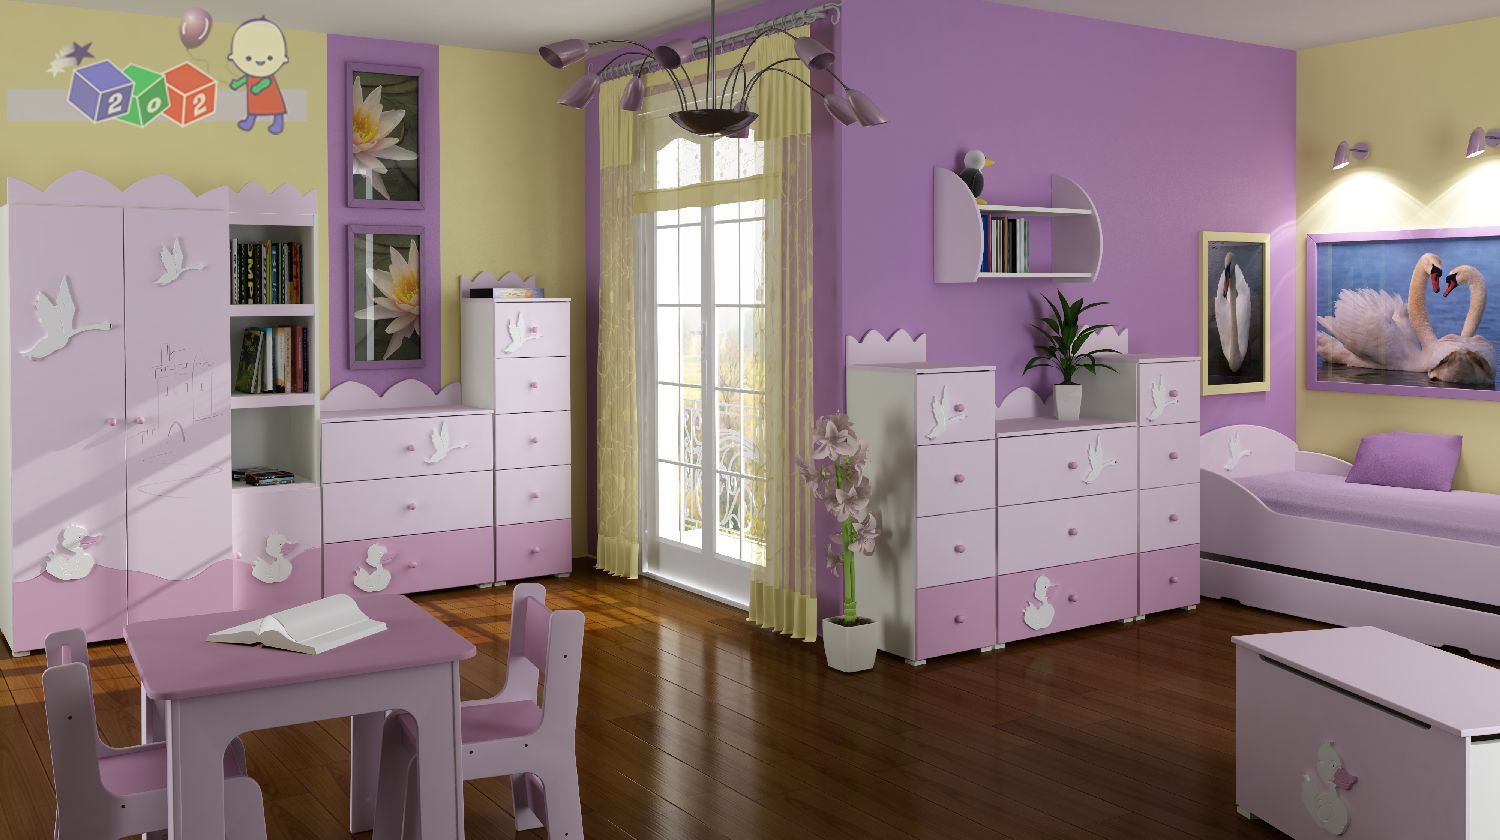 Wooden Flooring Purple Awesome Wooden Flooring Matched With Purple And Yellow Accent Wall Color In Kid Room Ideas Furnished With Tiny Table And Chairs Plus Completed With Cupboard And Single Bed Kids Room 15 Trendy Kids Room Ideas For The Bold Modern Home